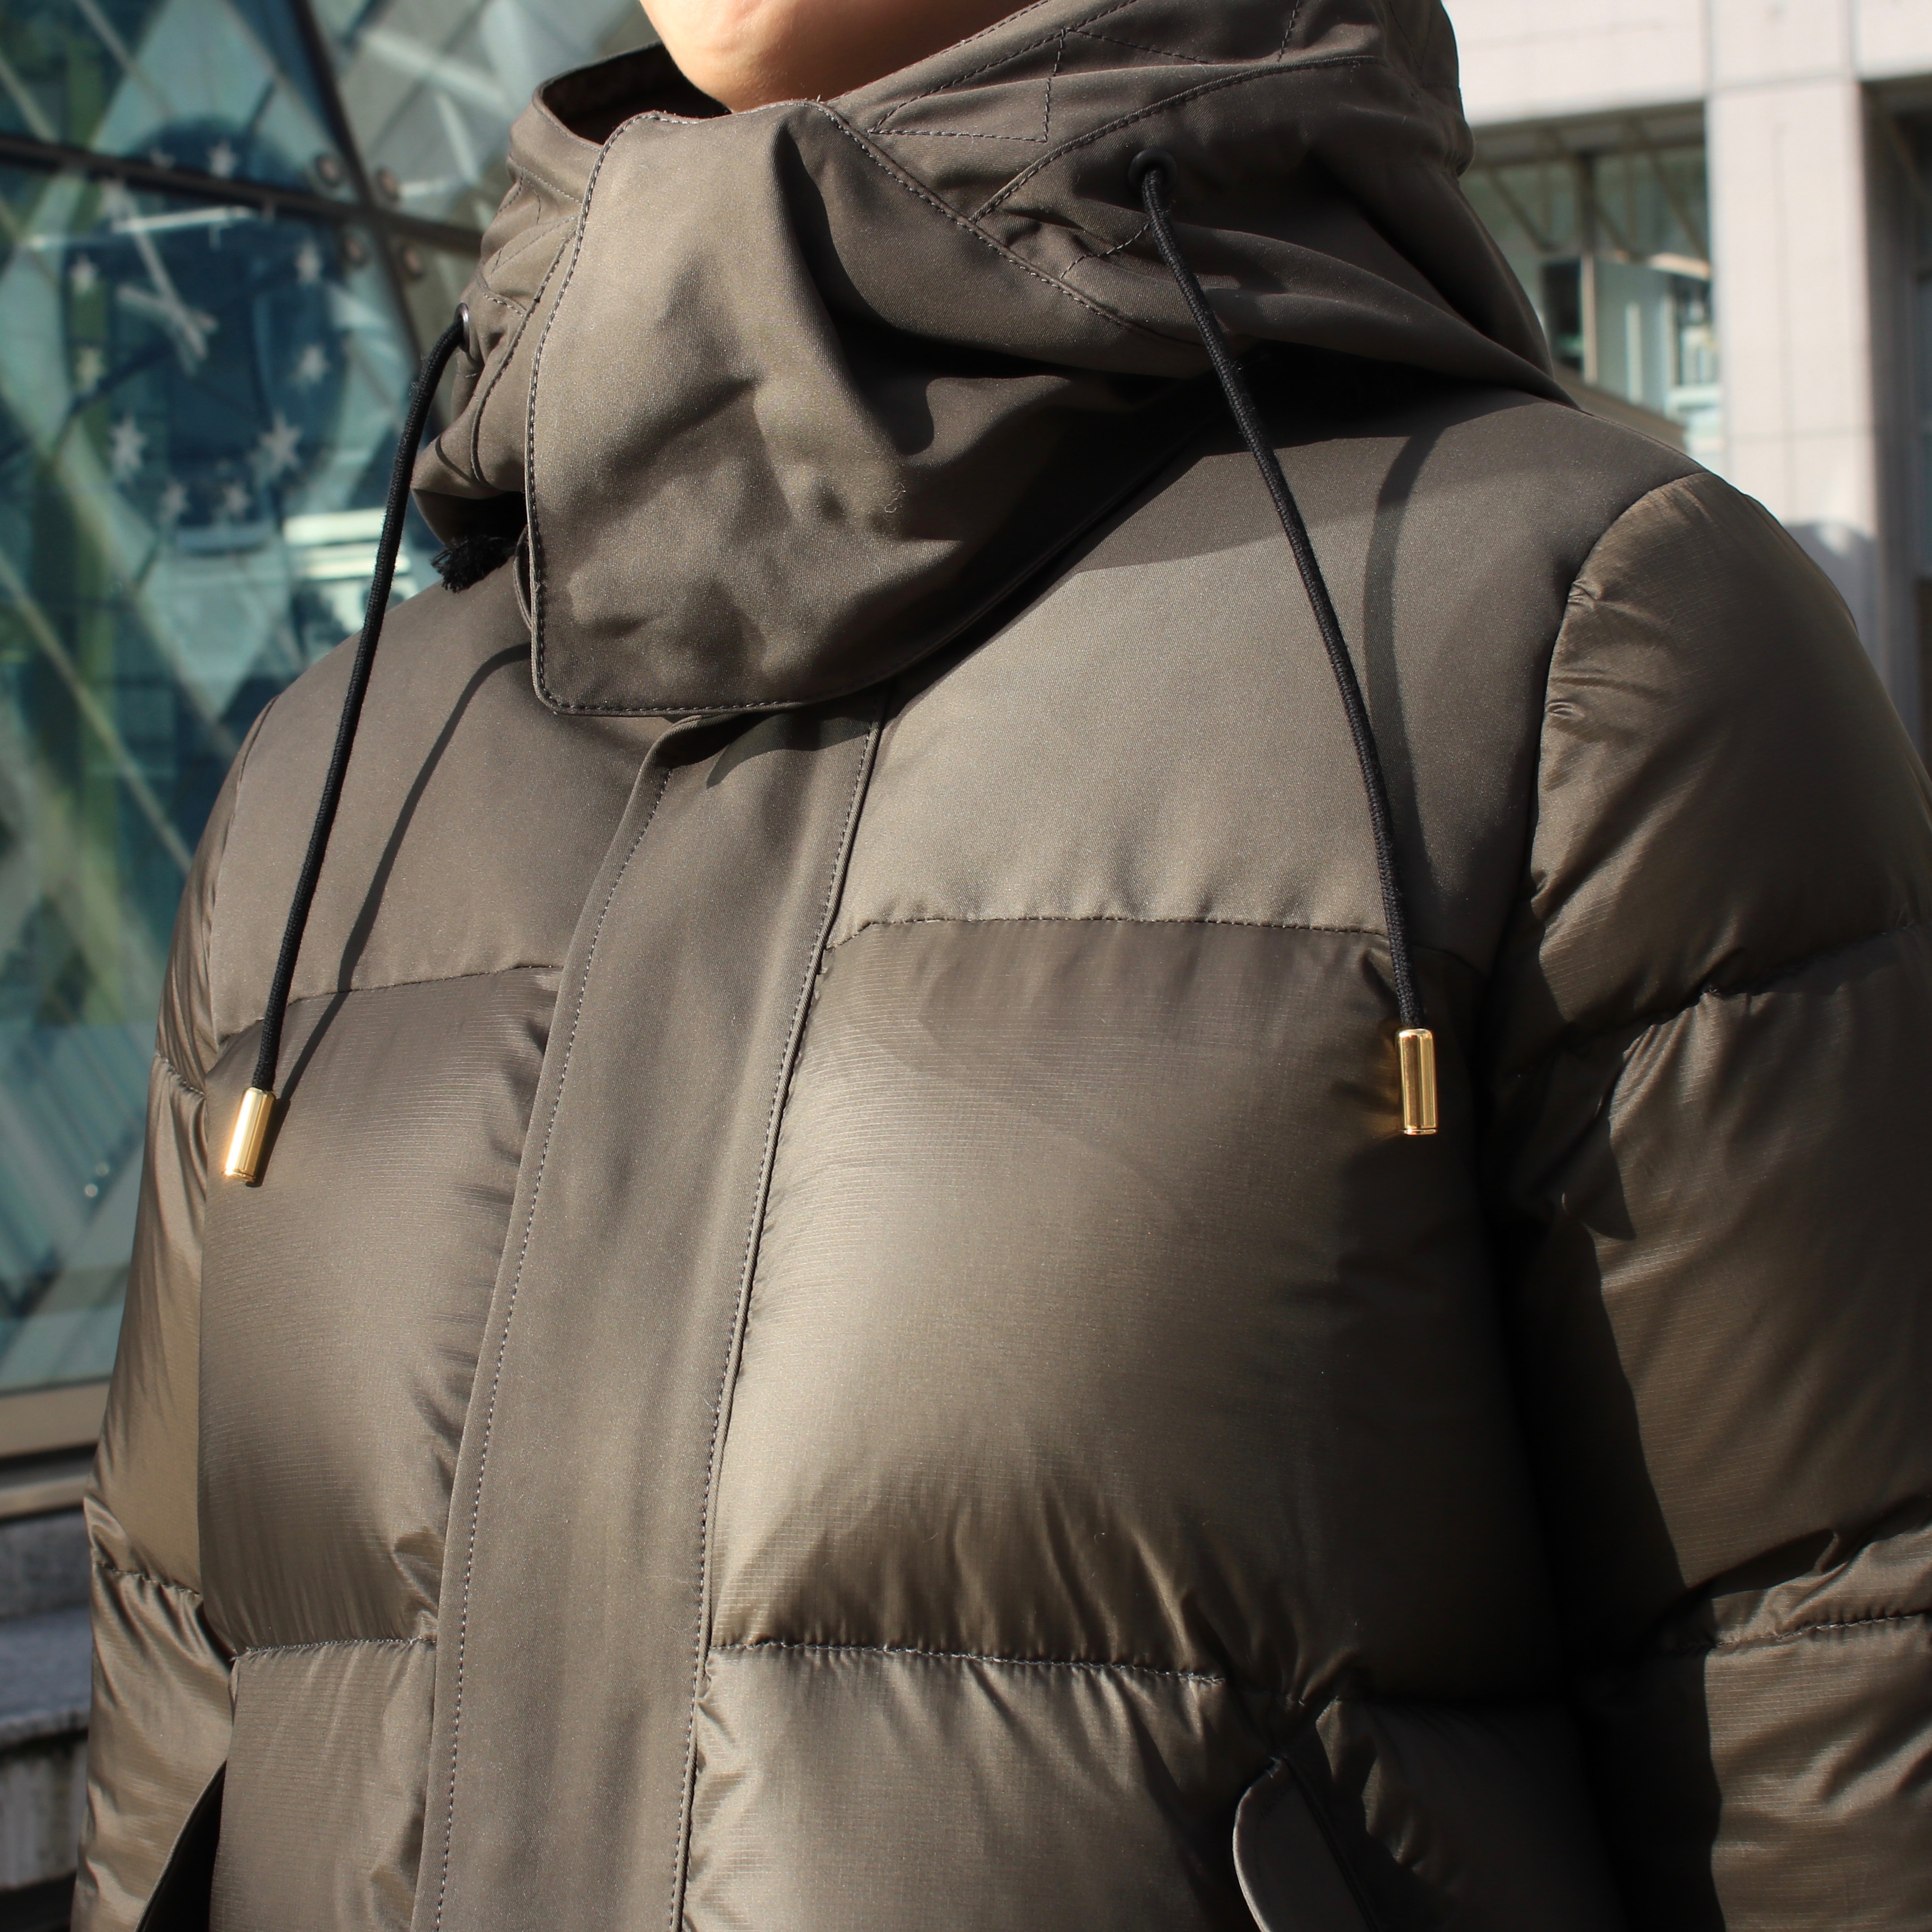 THE RERACS “DOWN JACKET”